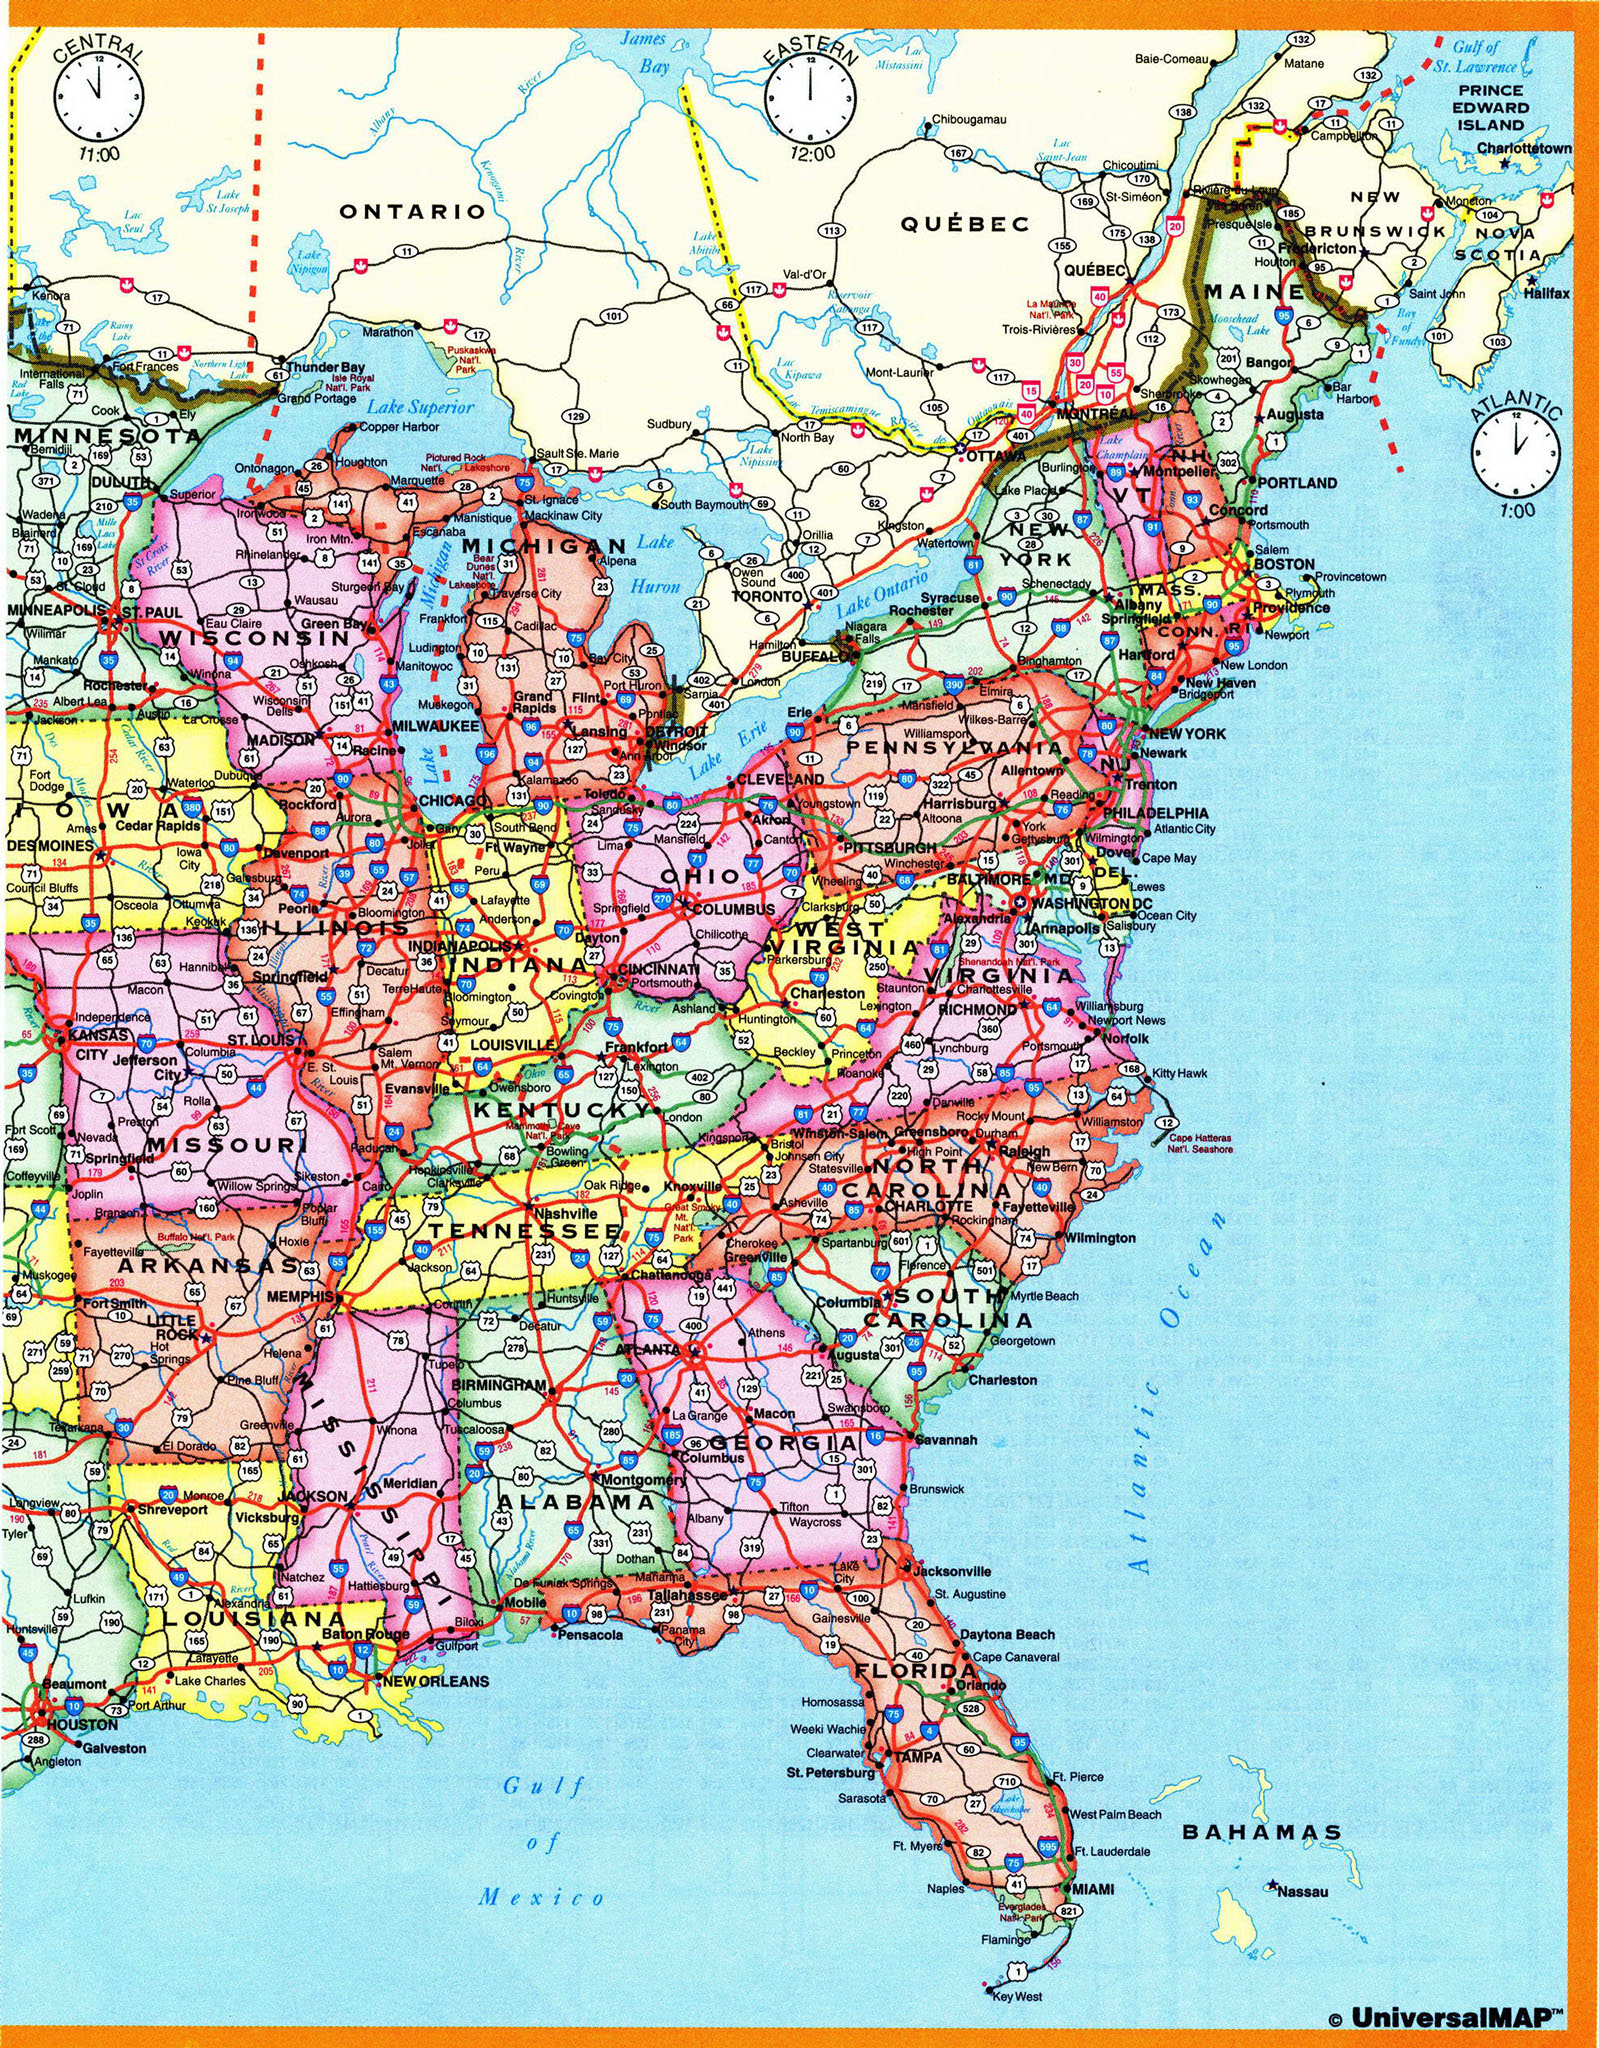 Political Time Zone Map Whatsanswer In, us time zone map with roads pic, do...